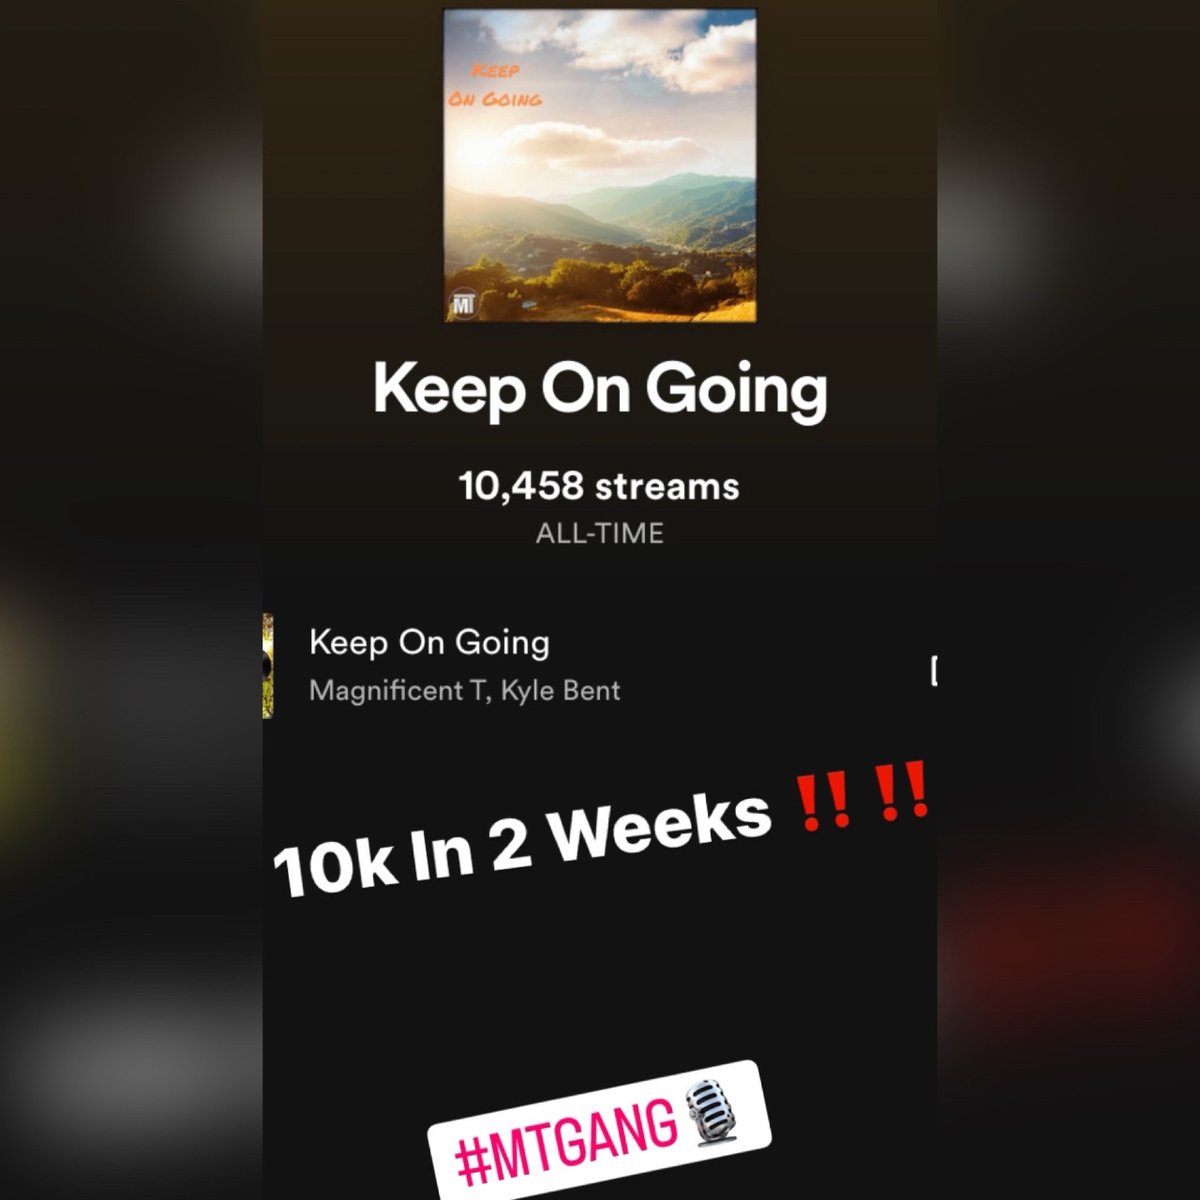 My New Single Keep On Going Has Done 10k On Spotify So Far In 2 Weeks ‼️ Shout Out To Everyone Listening 🙏🏼 And Link Below If You Haven’t Yet ‼️👇🏼👇🏼
-
hyperfollow.com/MagnificentT
-
#MTGang🎙️ #Rap #HipHop #KeepOnGoing #KyleBent
#NewSong2023 #Spotify